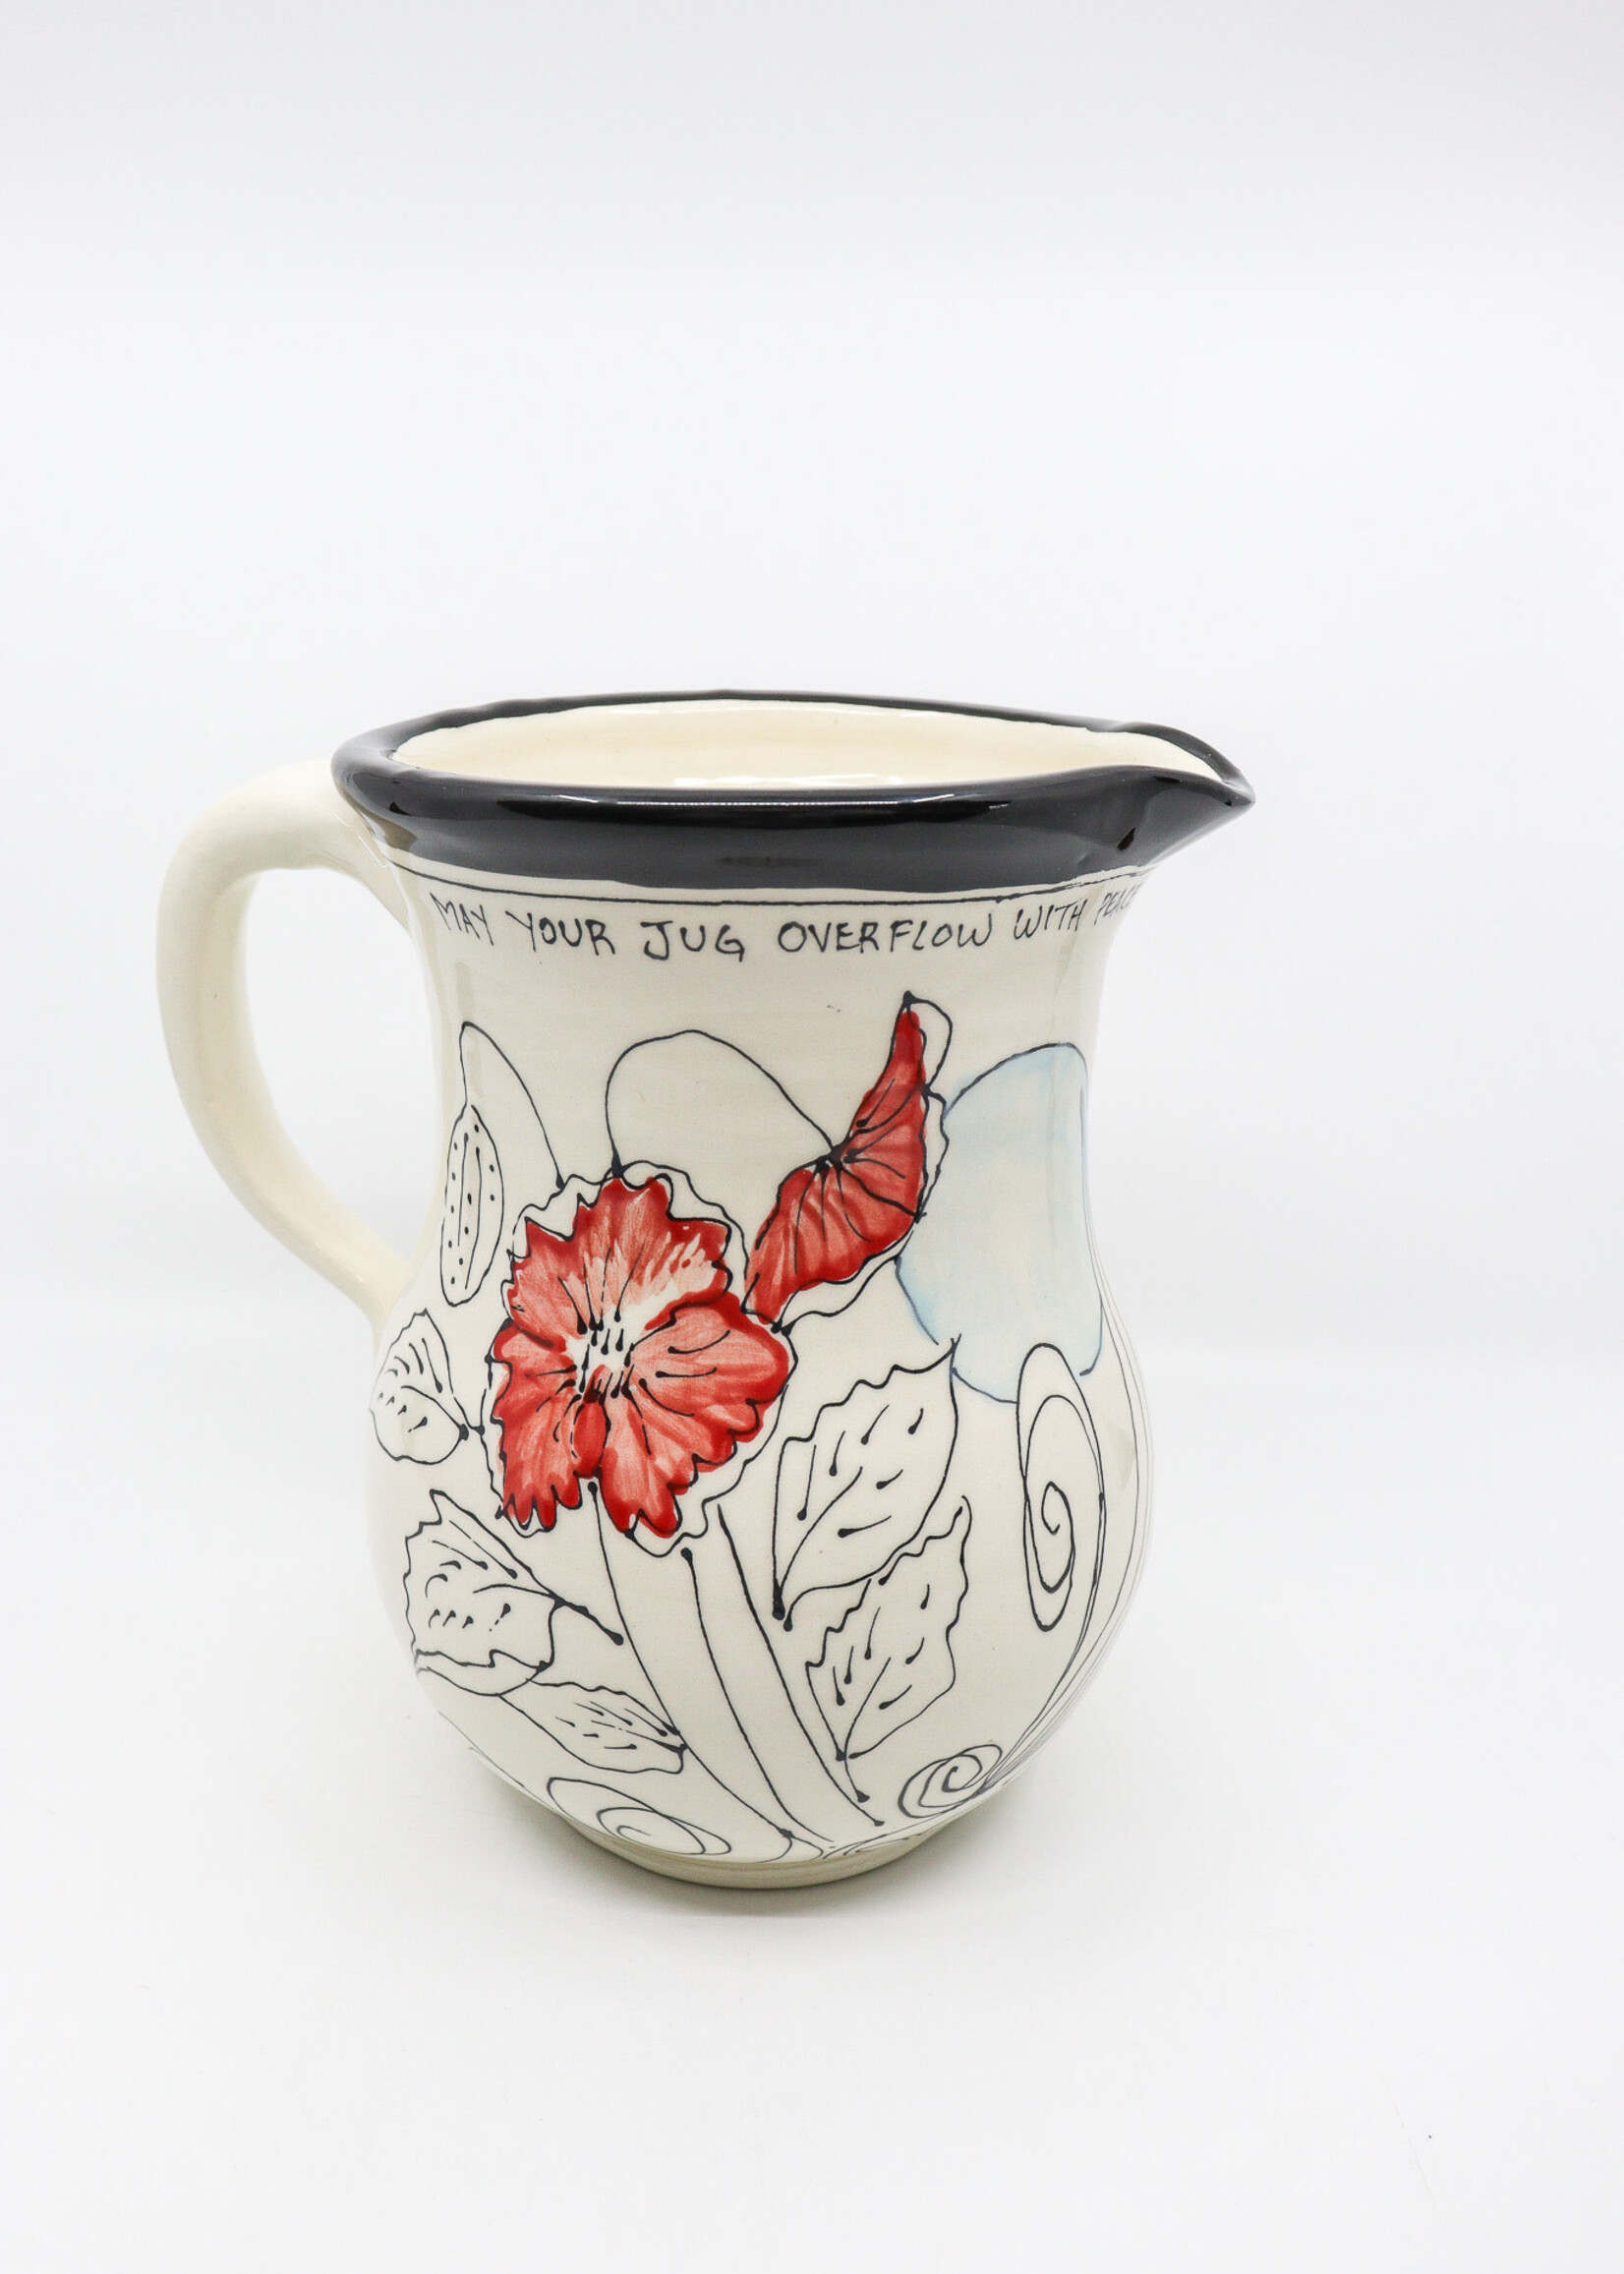 CERAMICS - Medium Jug, Poppies and Wheats, "May Your Jug Overflow with Peace, Love and pure Awesomeness"